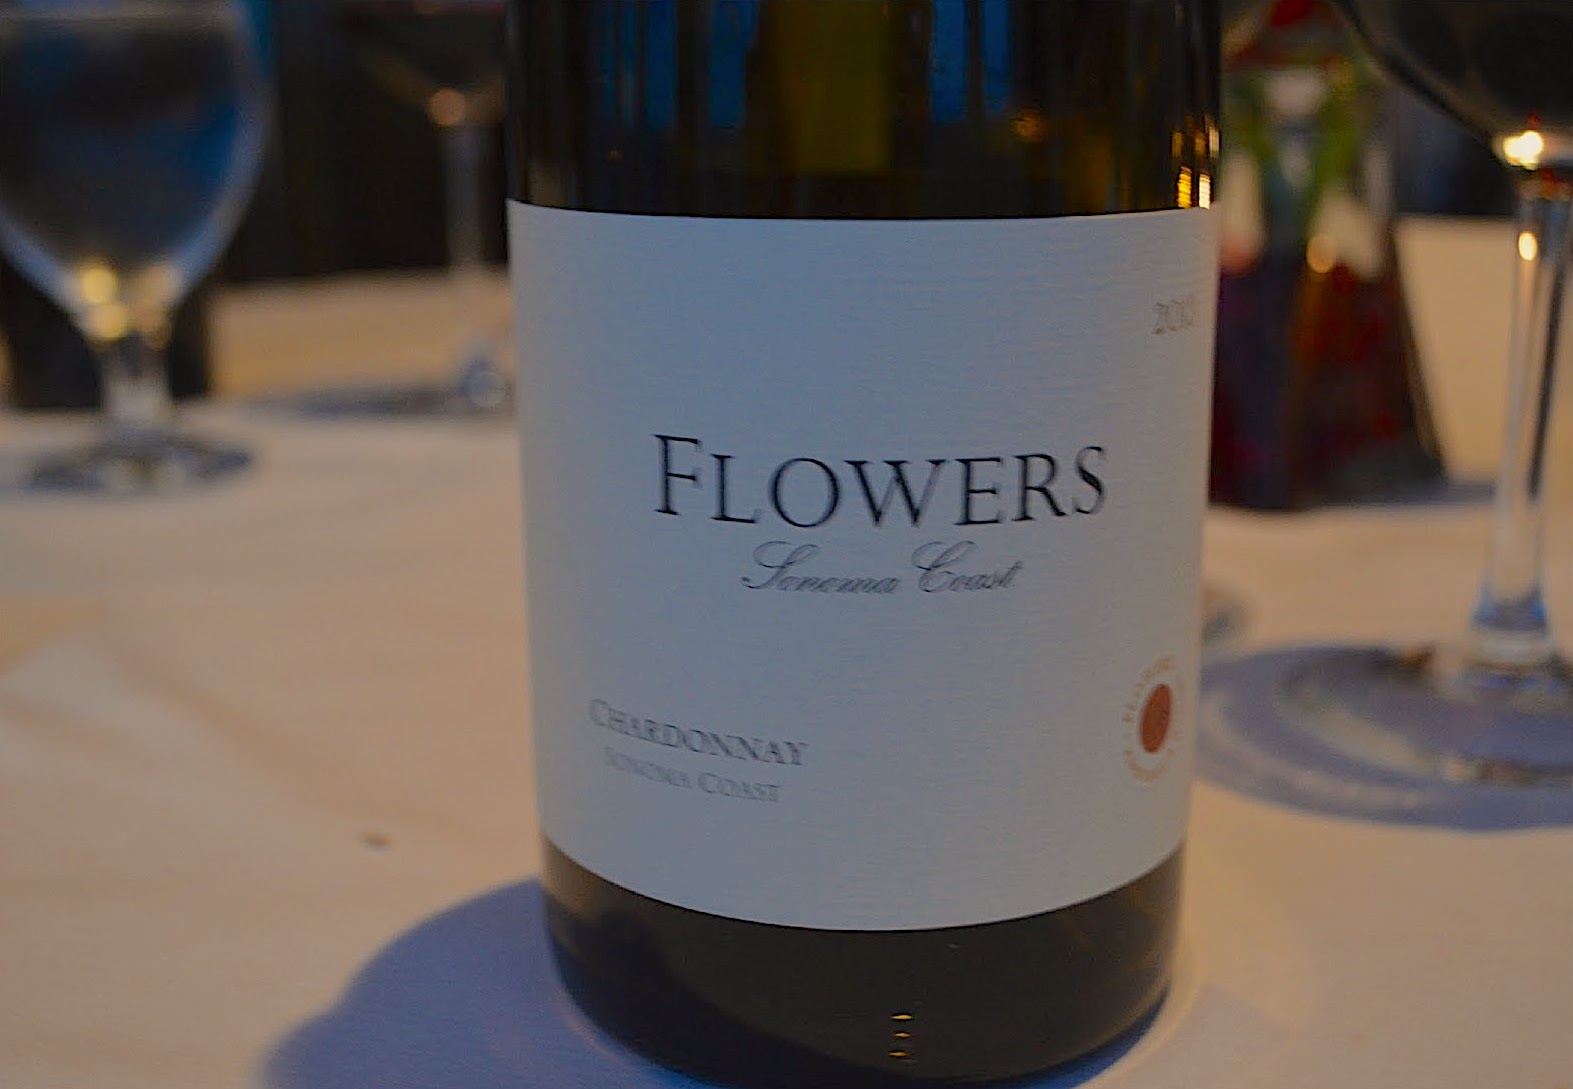 Weekend Wine: Flowers Sonoma Coast Chardonnay at the LCBO